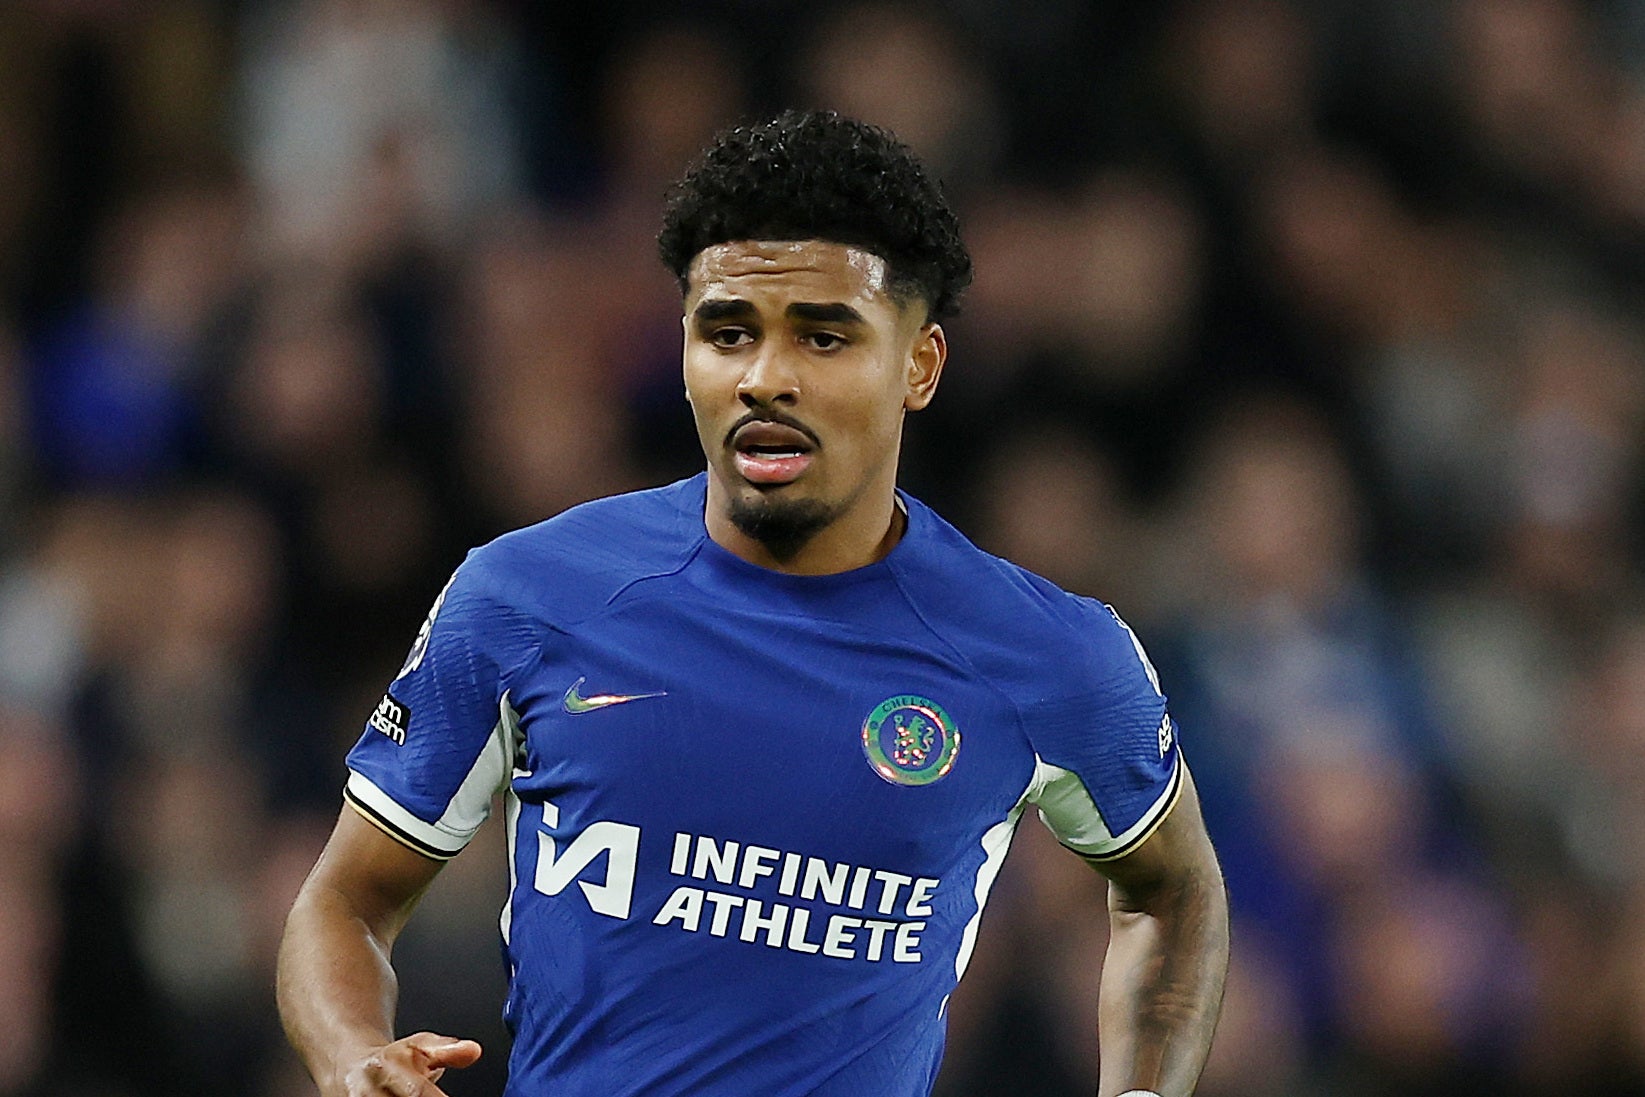 ian maatsen opens up on chelsea frustrations ahead of likely £35m summer exit